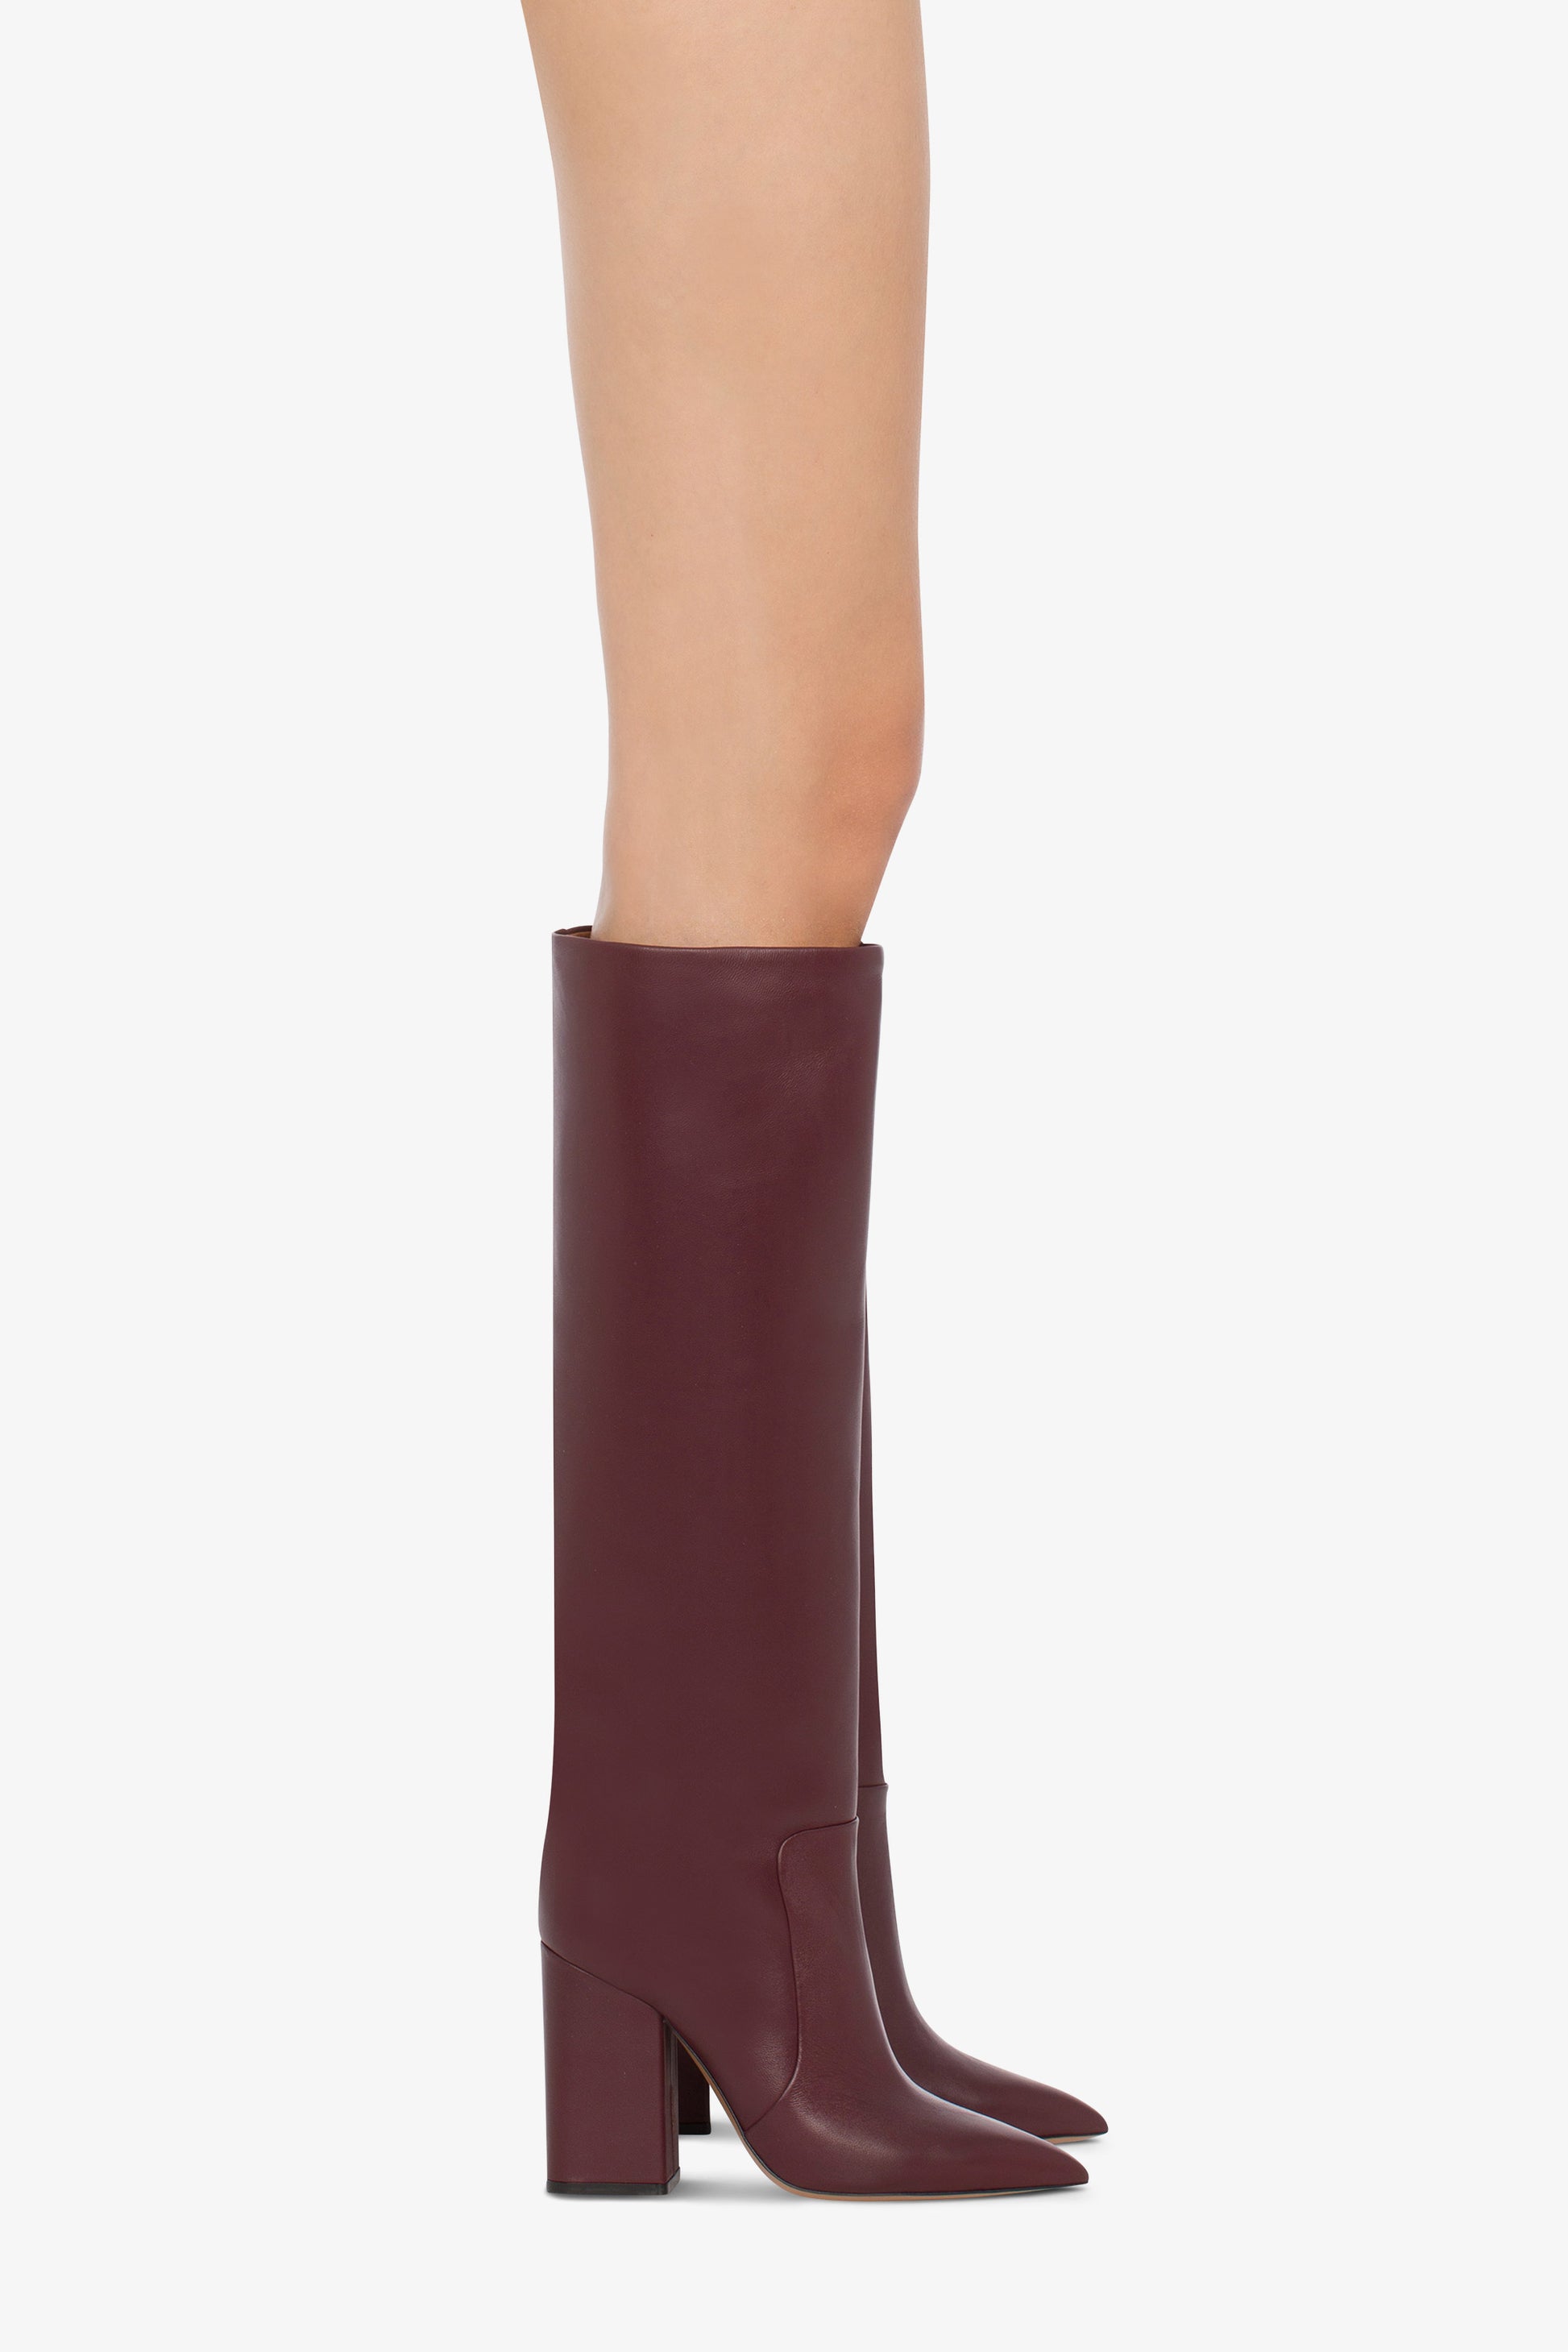 Knee-high boots in smooth burgundy leather - Producto usado